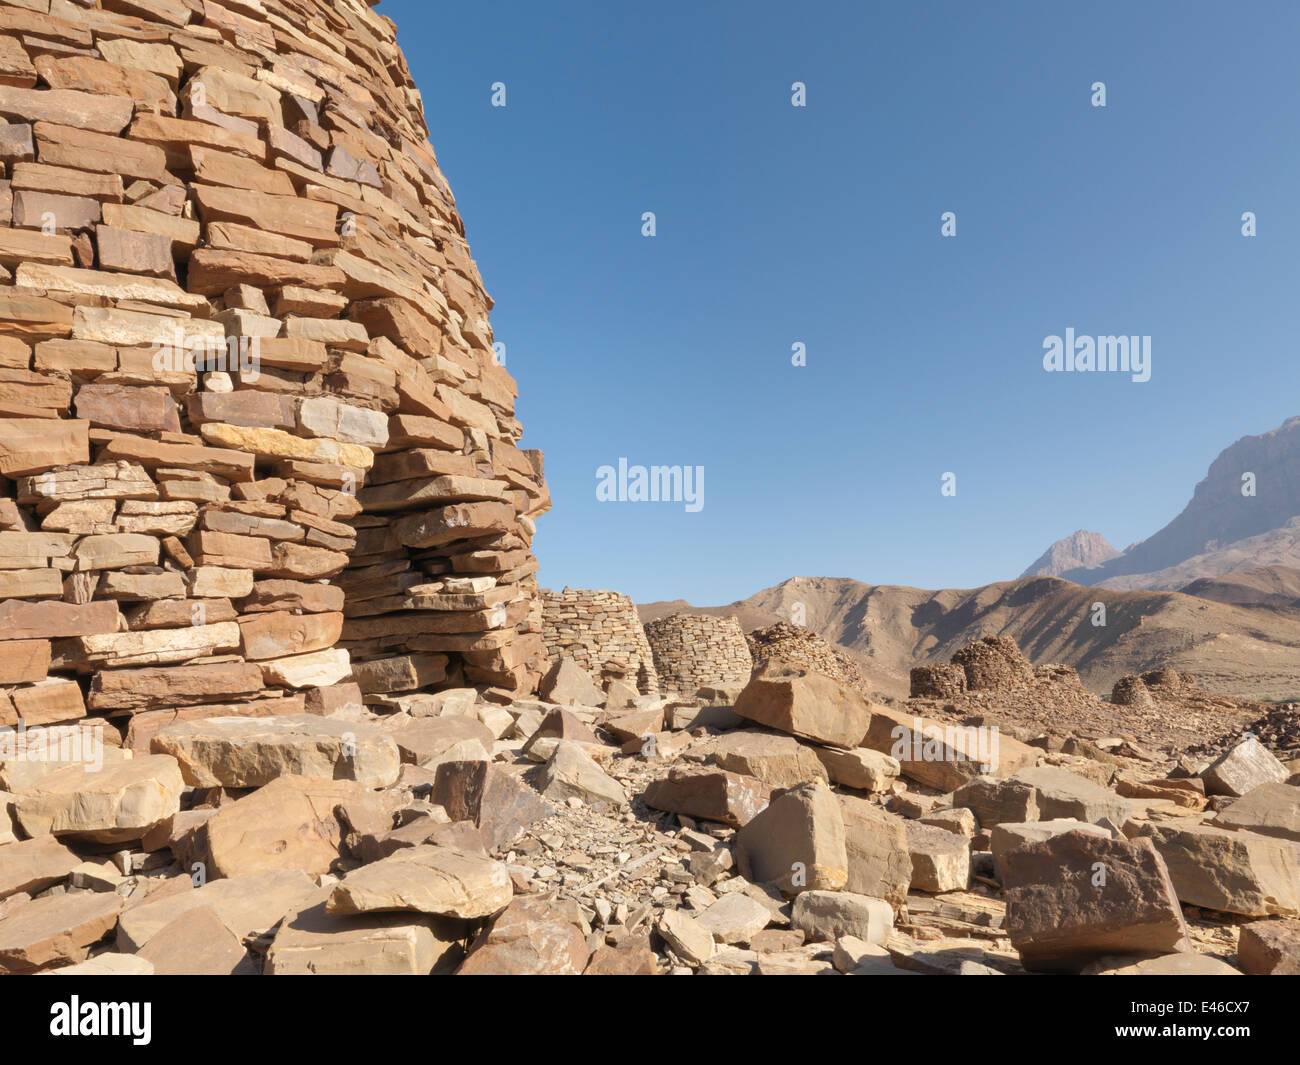 UNESCO World Heritage site in Oman Middle East. Ancient Beehive tombs on a ridge top in the Hajjar mountains near Al-Ayn. Stock Photo